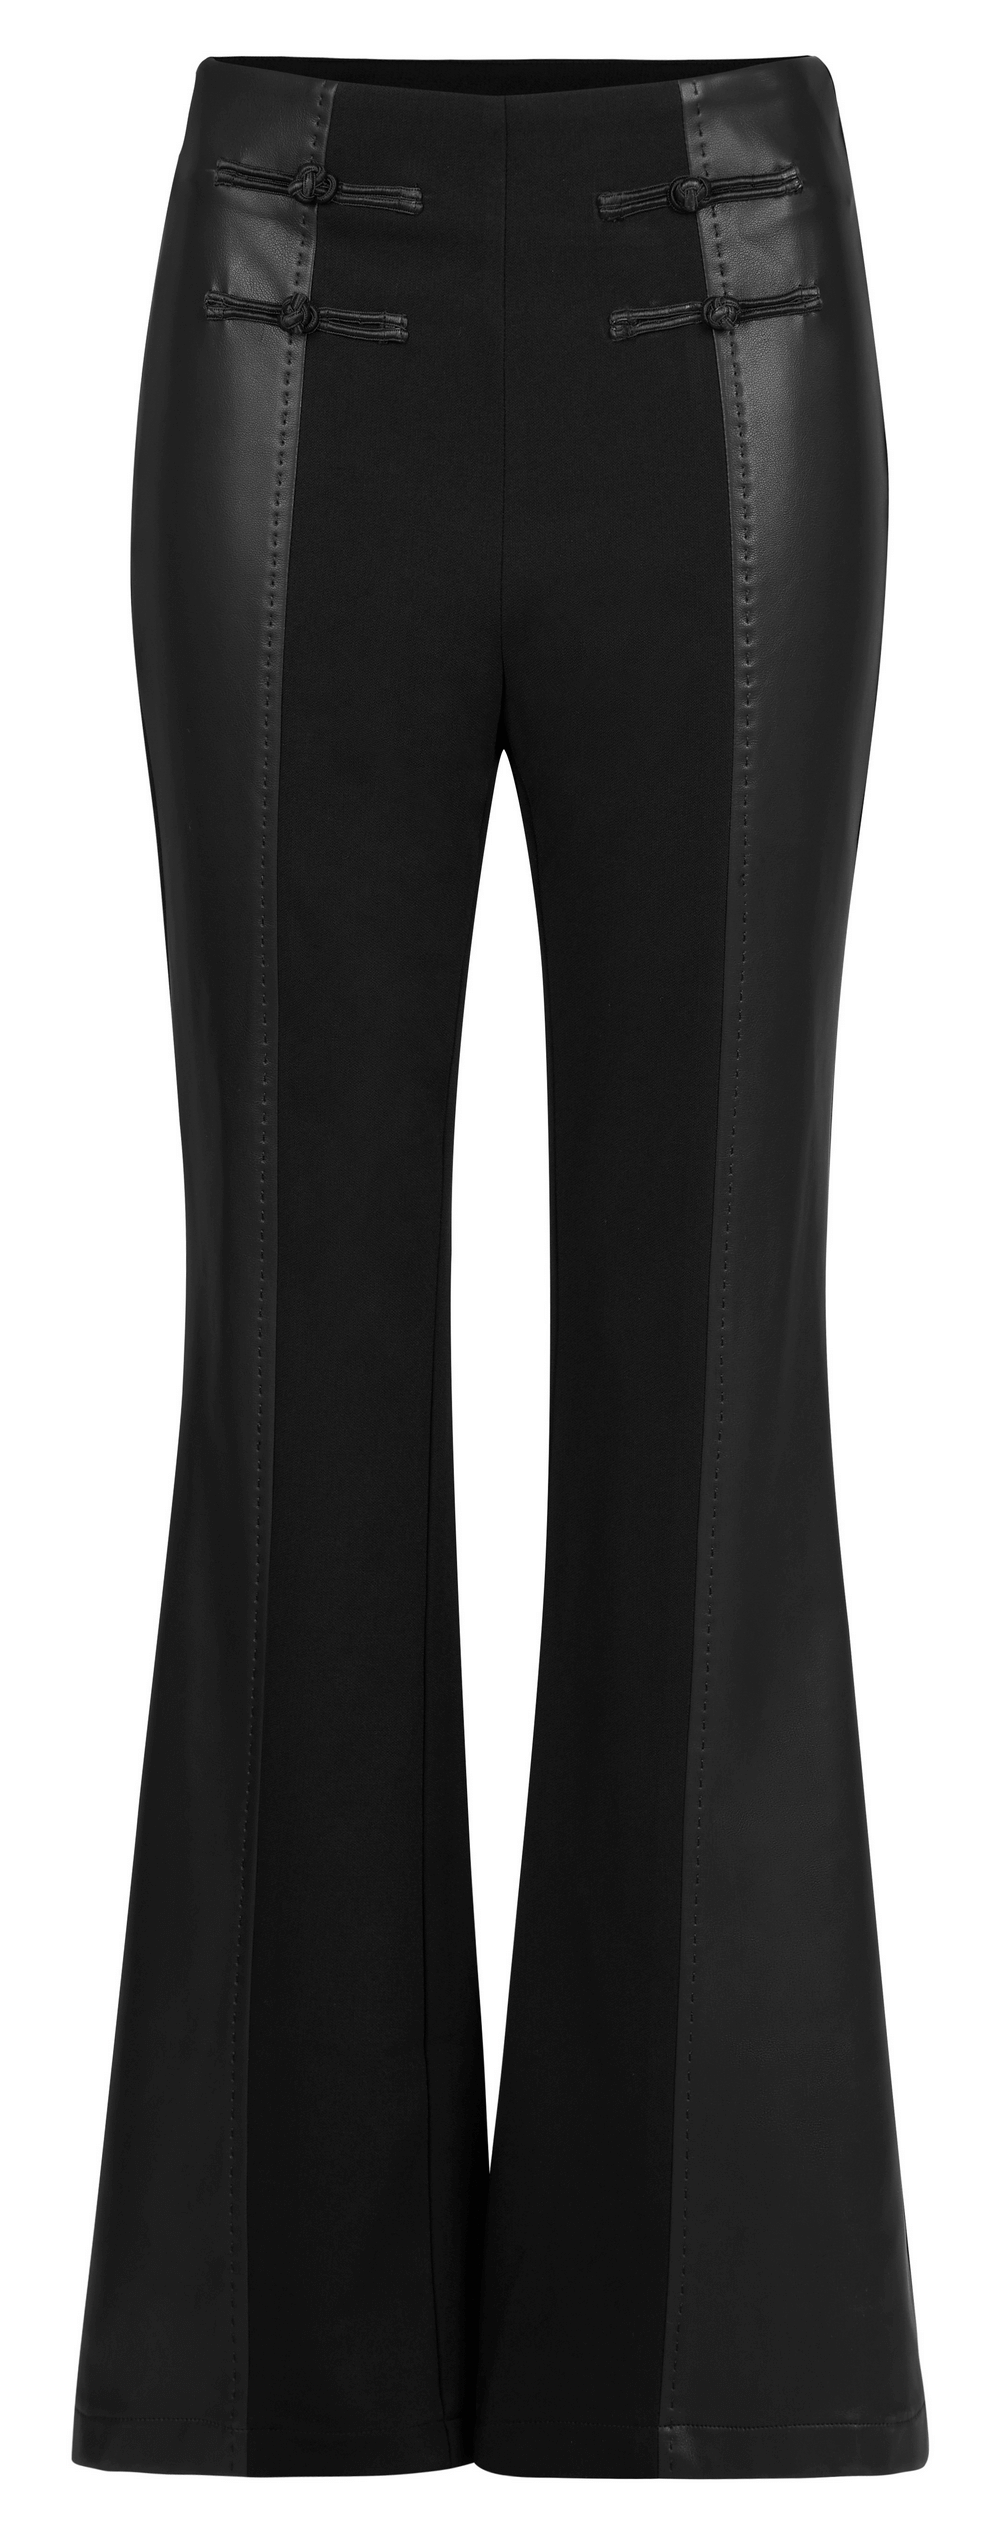 Retro High-Waist Belted Flared Trousers with PU Accents - HARD'N'HEAVY